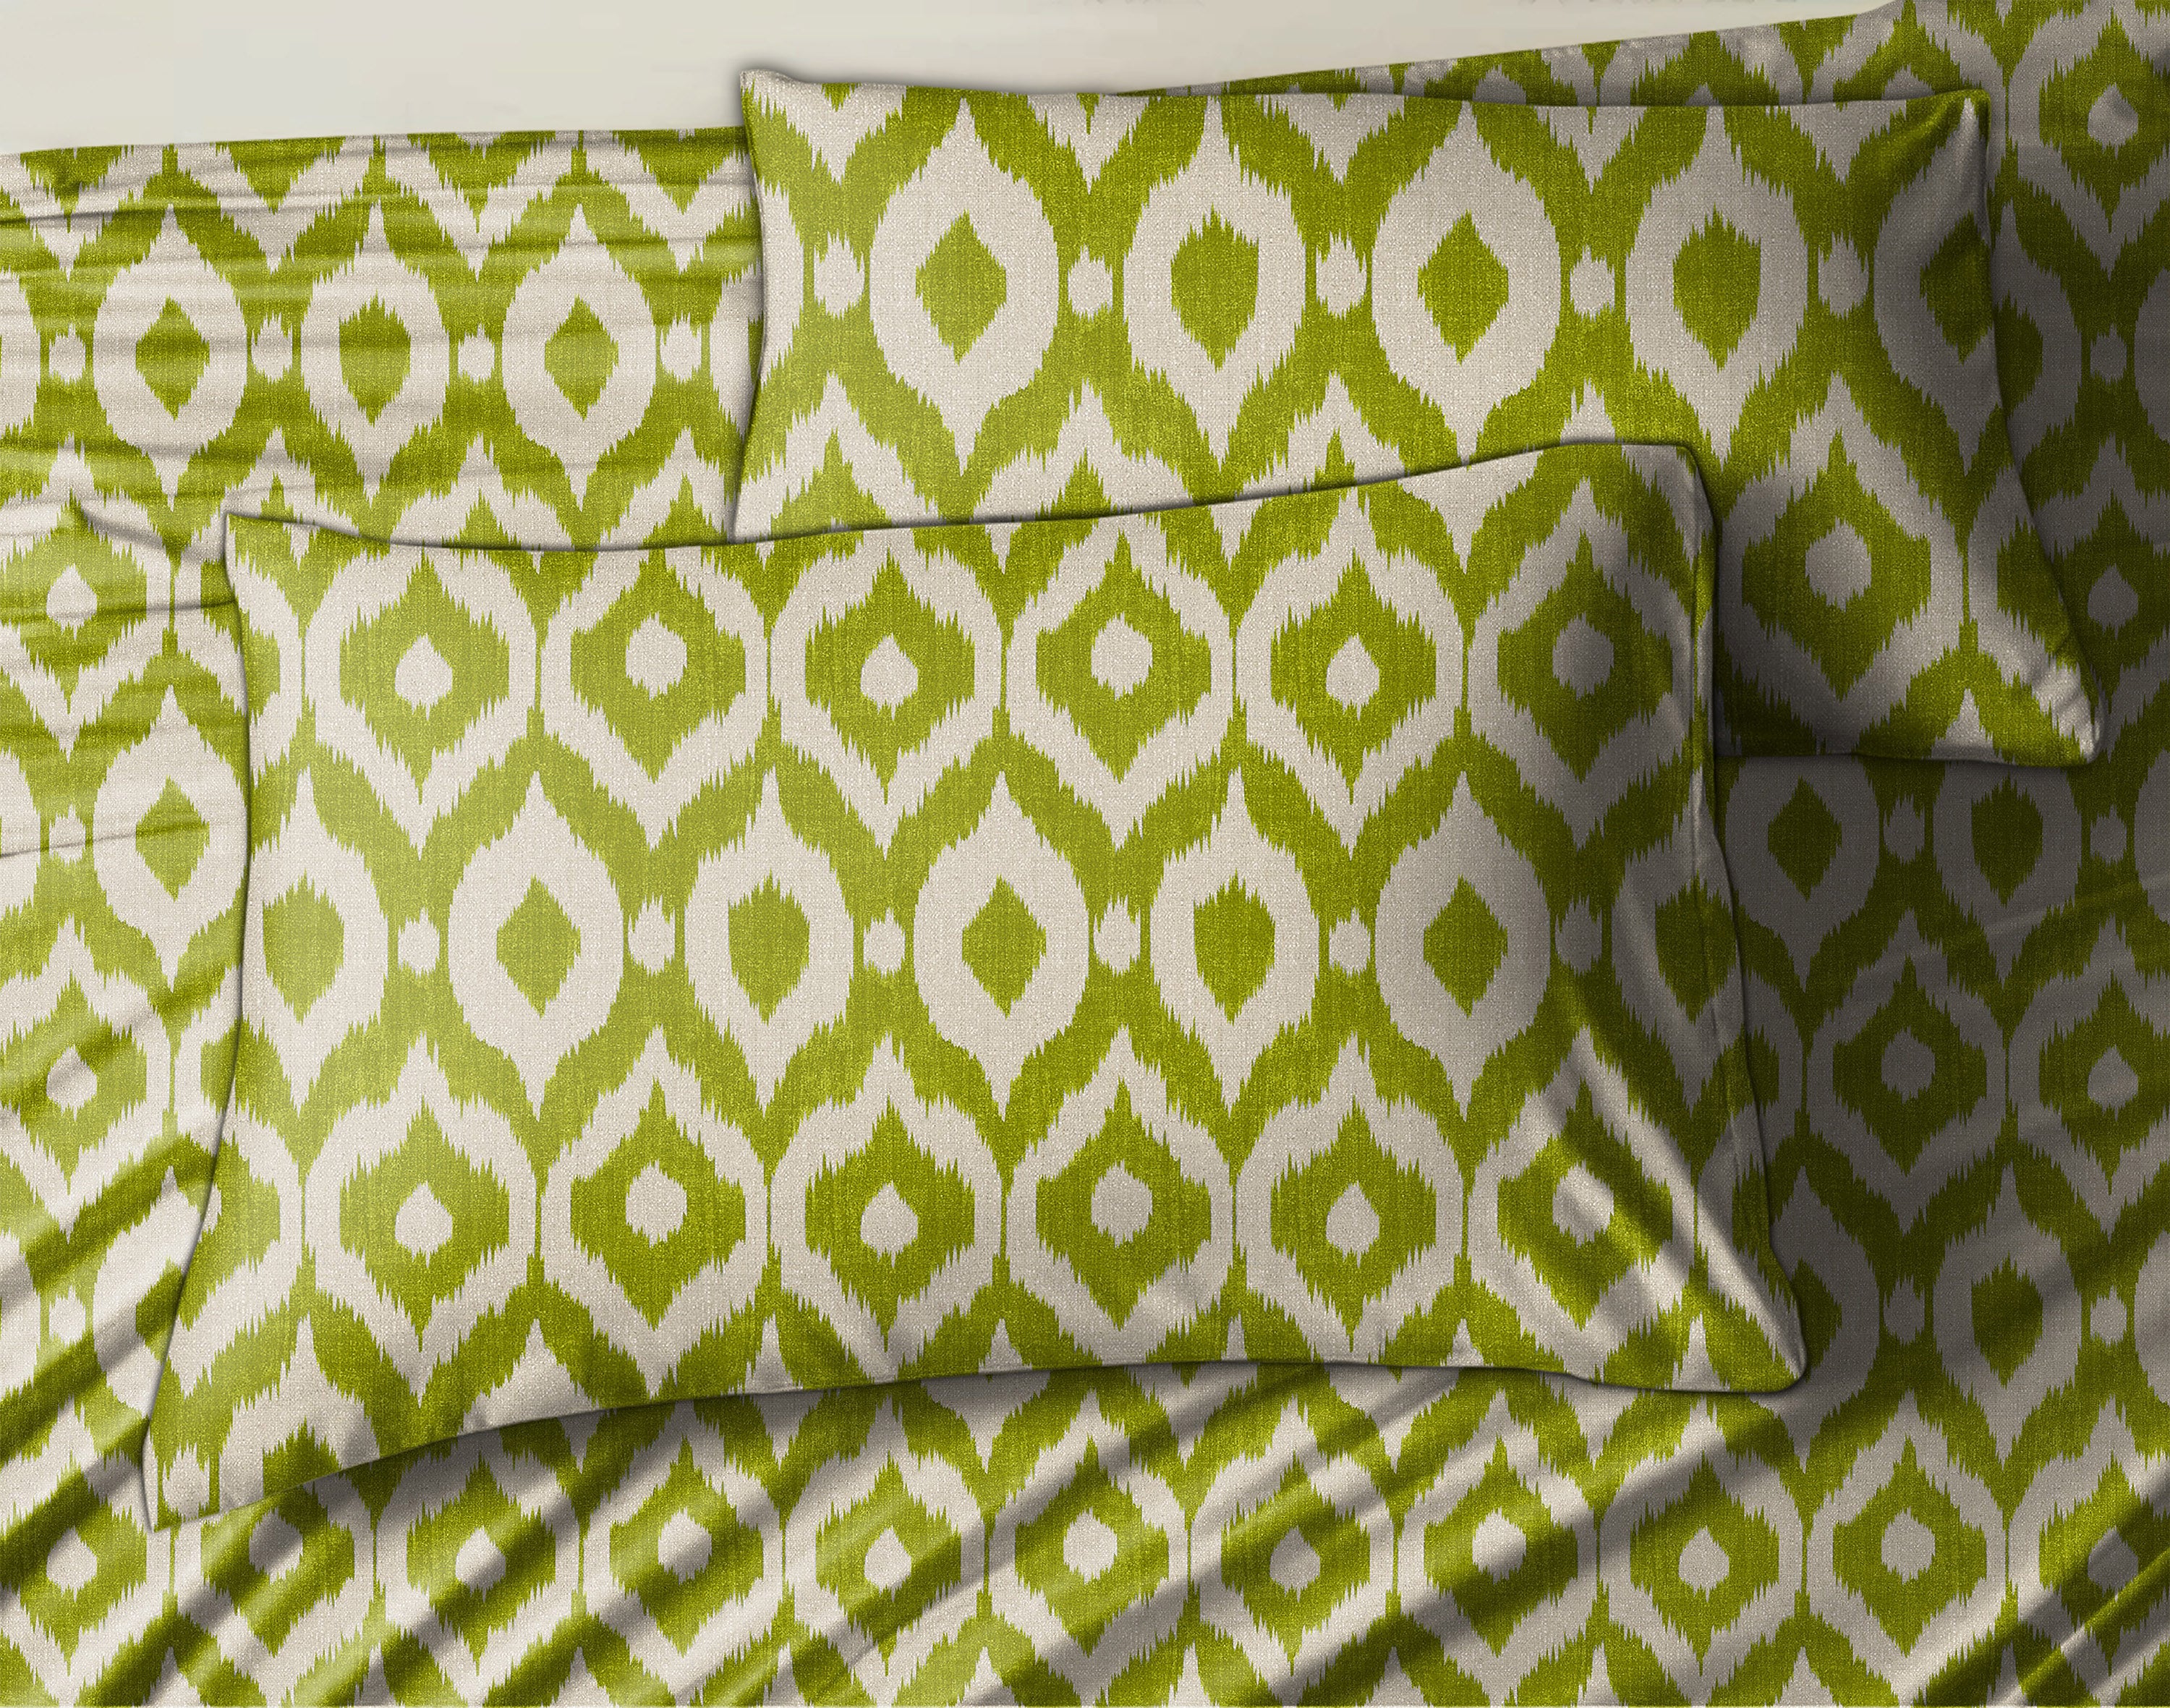 Bedcover Bistre Apple Green for Double Bed with 2 Pillow Covers King Size (104" X 90")